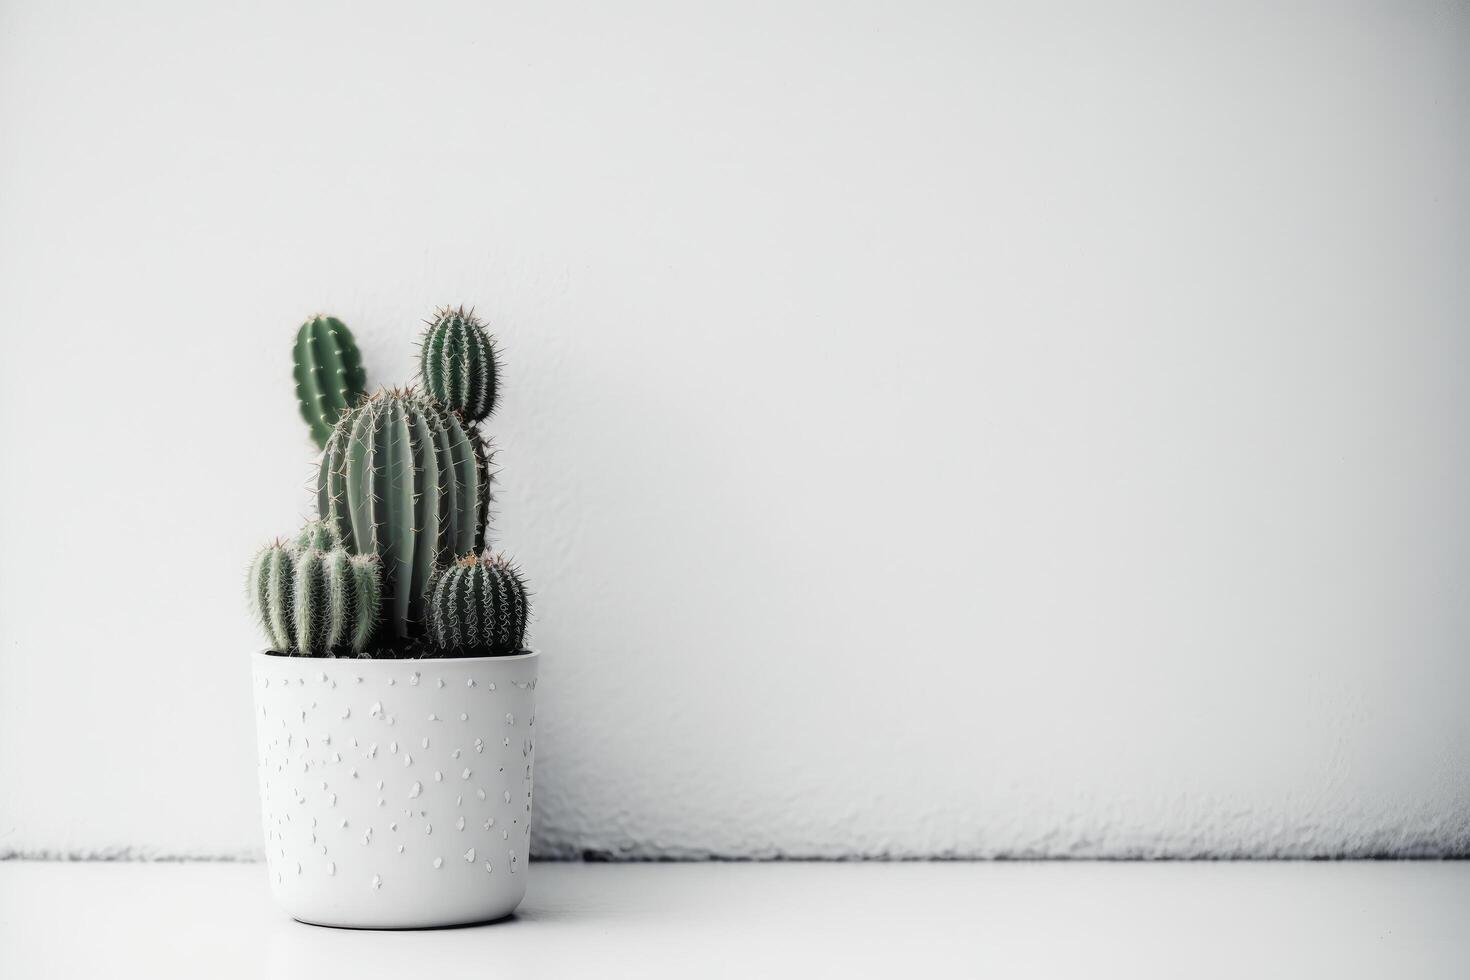 A real green cactus in a white pot. Illustration photo